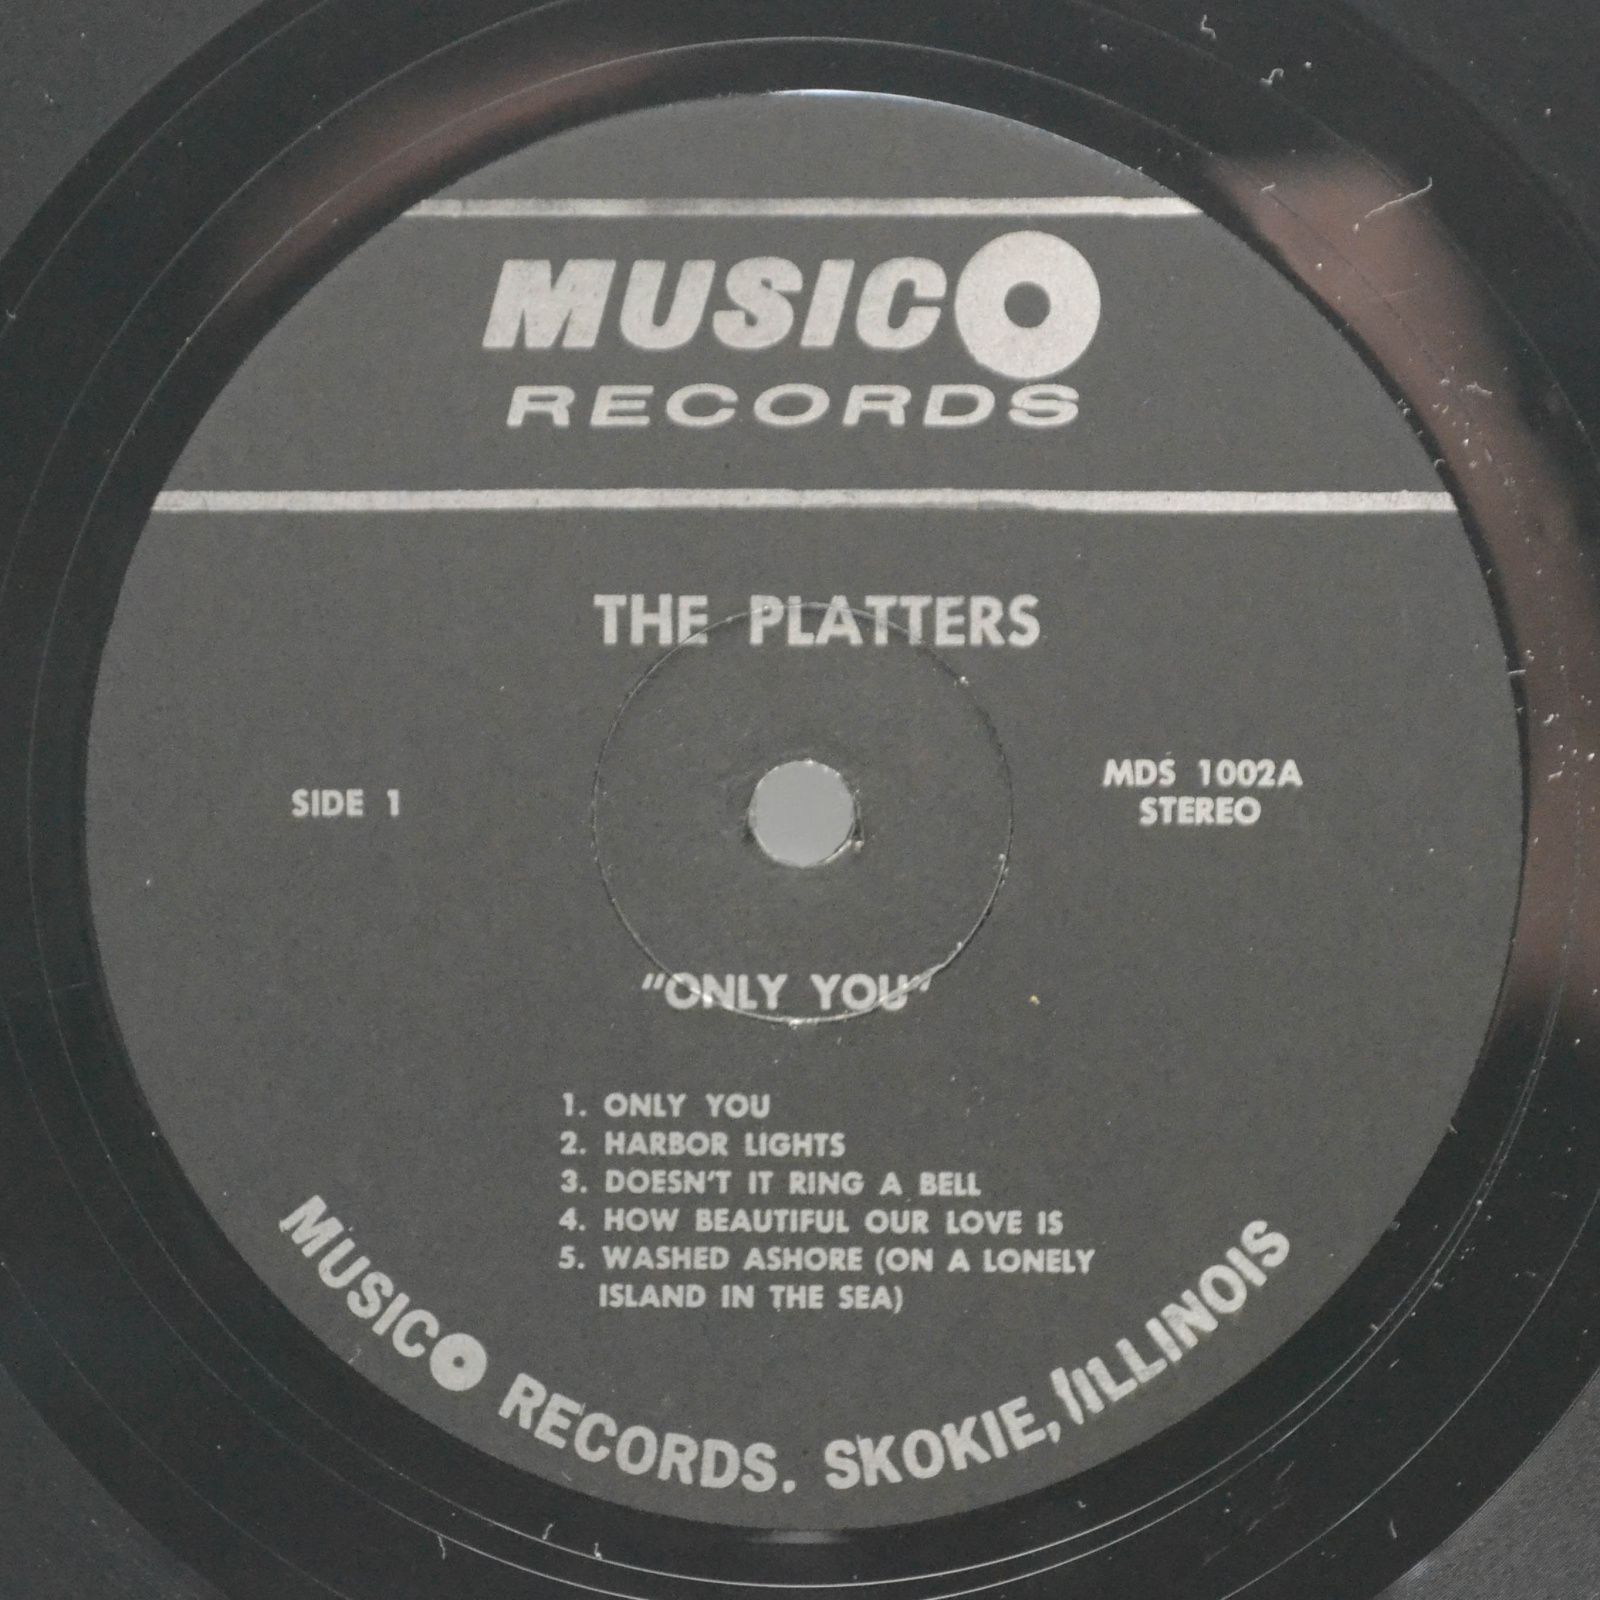 The Platters — Only You - The One And Only Original Platters 10 Big Hits (USA), 1973